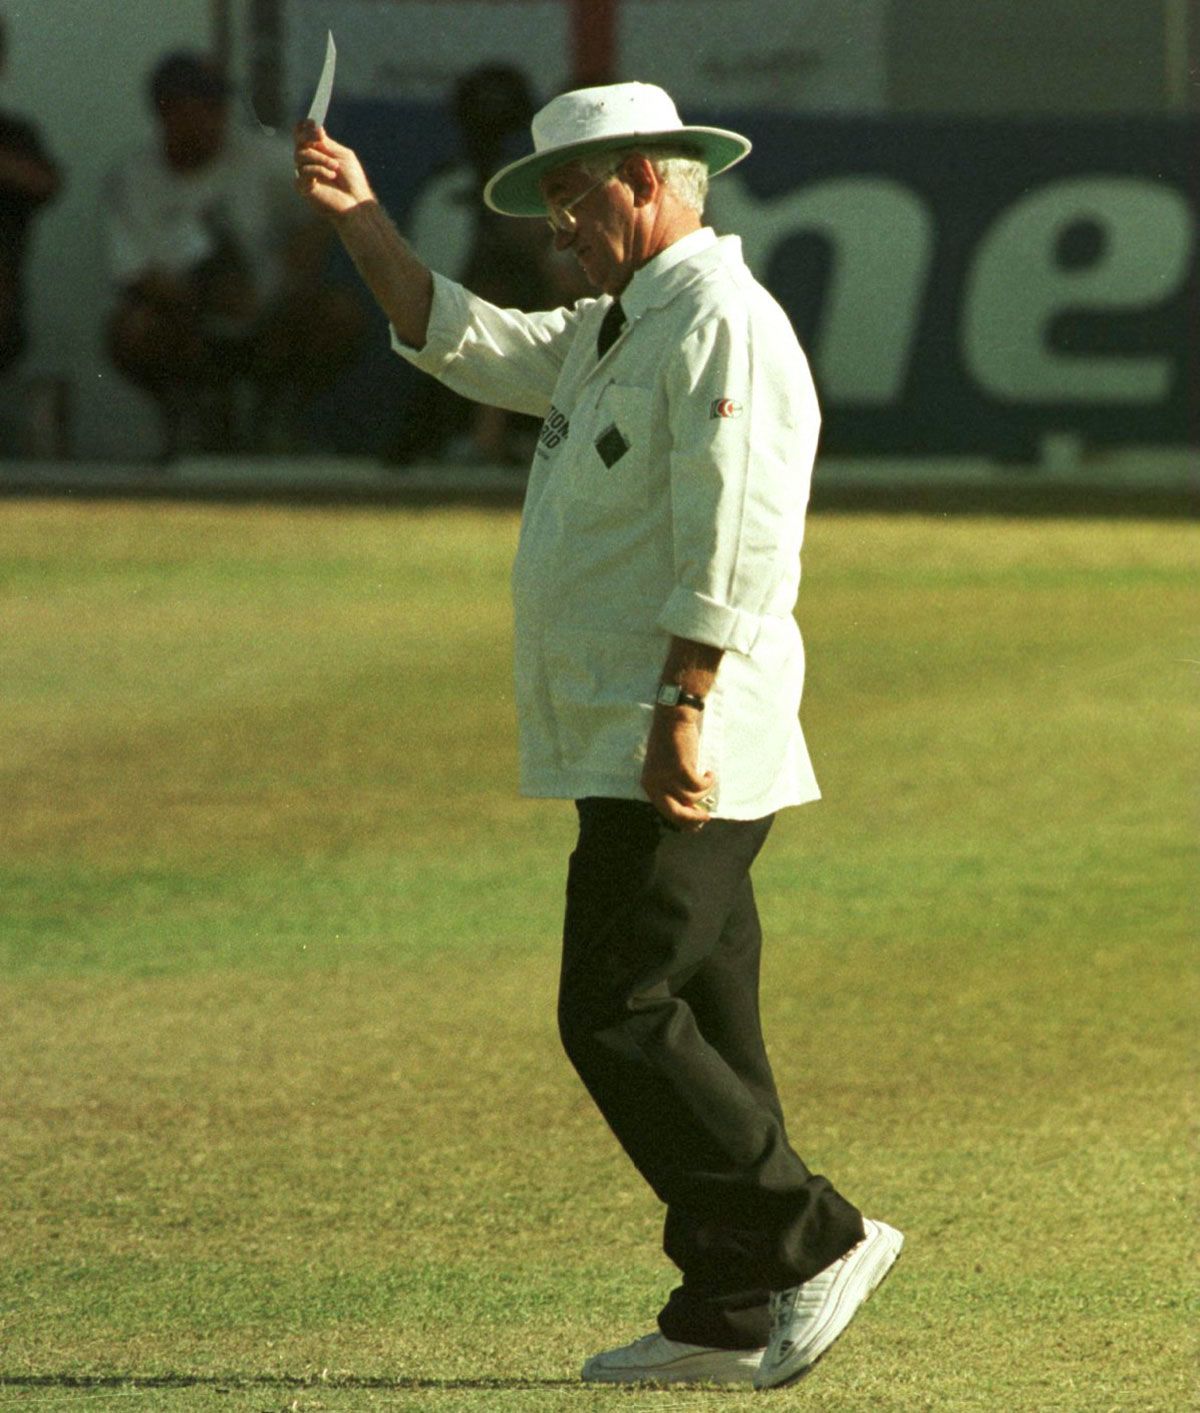 Umpire Cyril Mitchley jokingly batsman Philo Wallace a yellow card after having to leap out of the way to avoid getting injured by the batsman's shot, West Indies v England, 5th Test, 2nd day, March 13, 1998